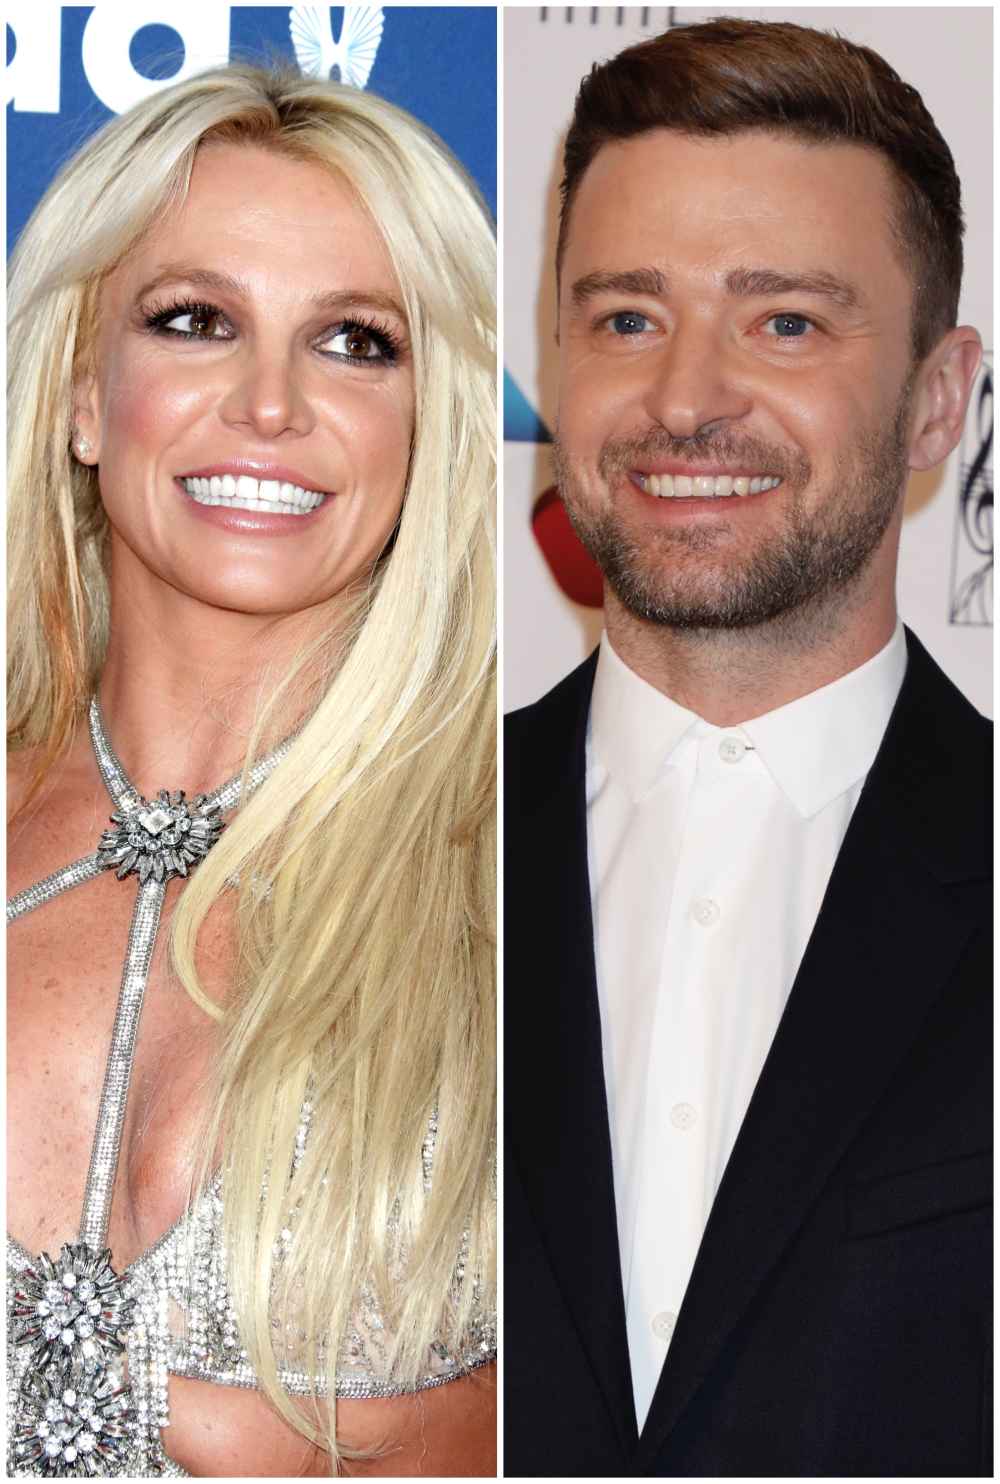 Britney Spears Doesn't Hold a Grudge Against Ex-Boyfriend Justin Timberlake